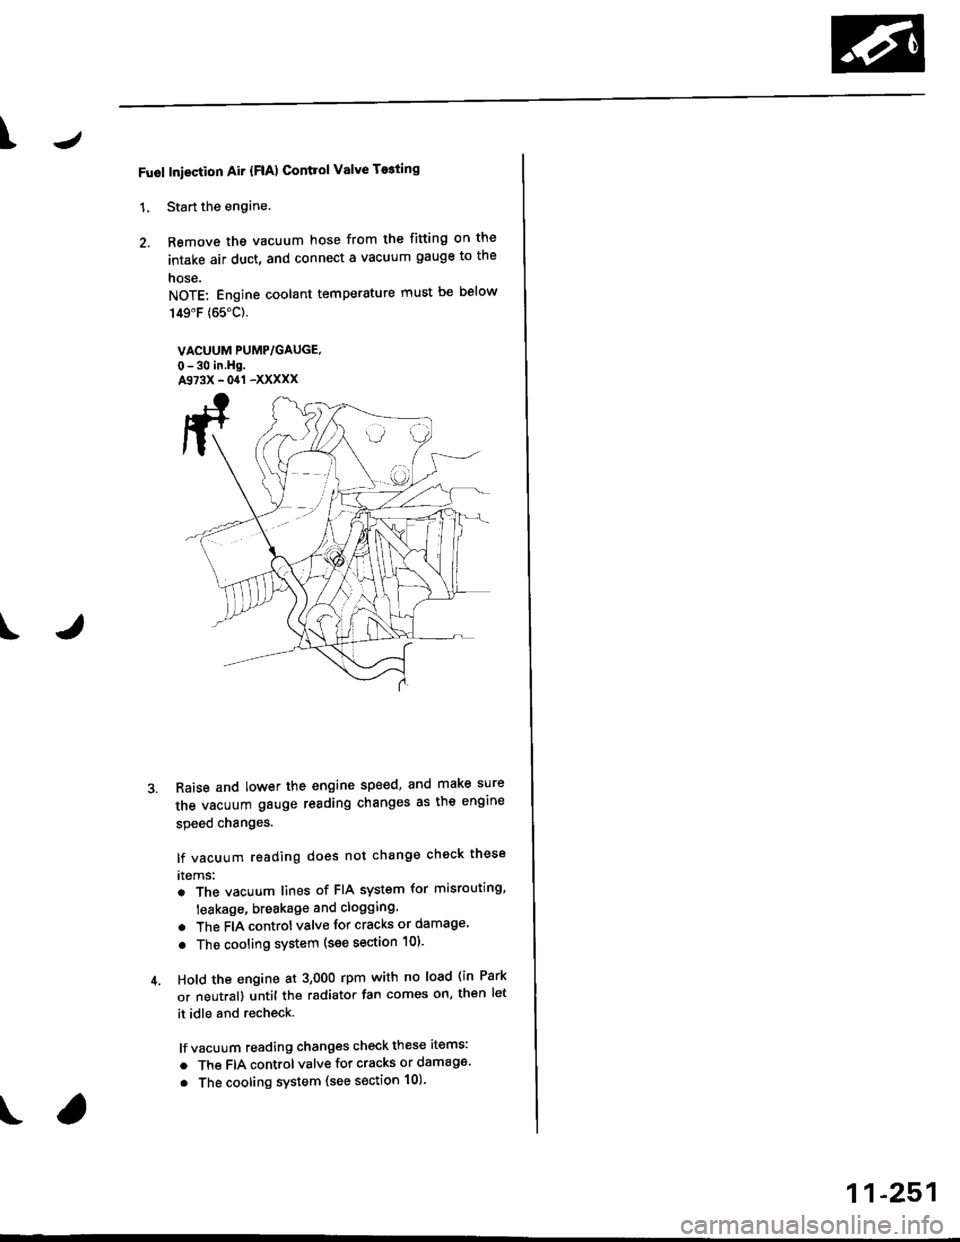 HONDA CIVIC 1998 6.G Workshop Manual \J
Fuol Iniection Air {FlA) Contlol Valve T$ting
1. Start the engine.
2. Remove the vacuum hose from the fitting on the
intake air duct, and connect a vacuum gauge to the
nose.
NOTE: Engine coolant te